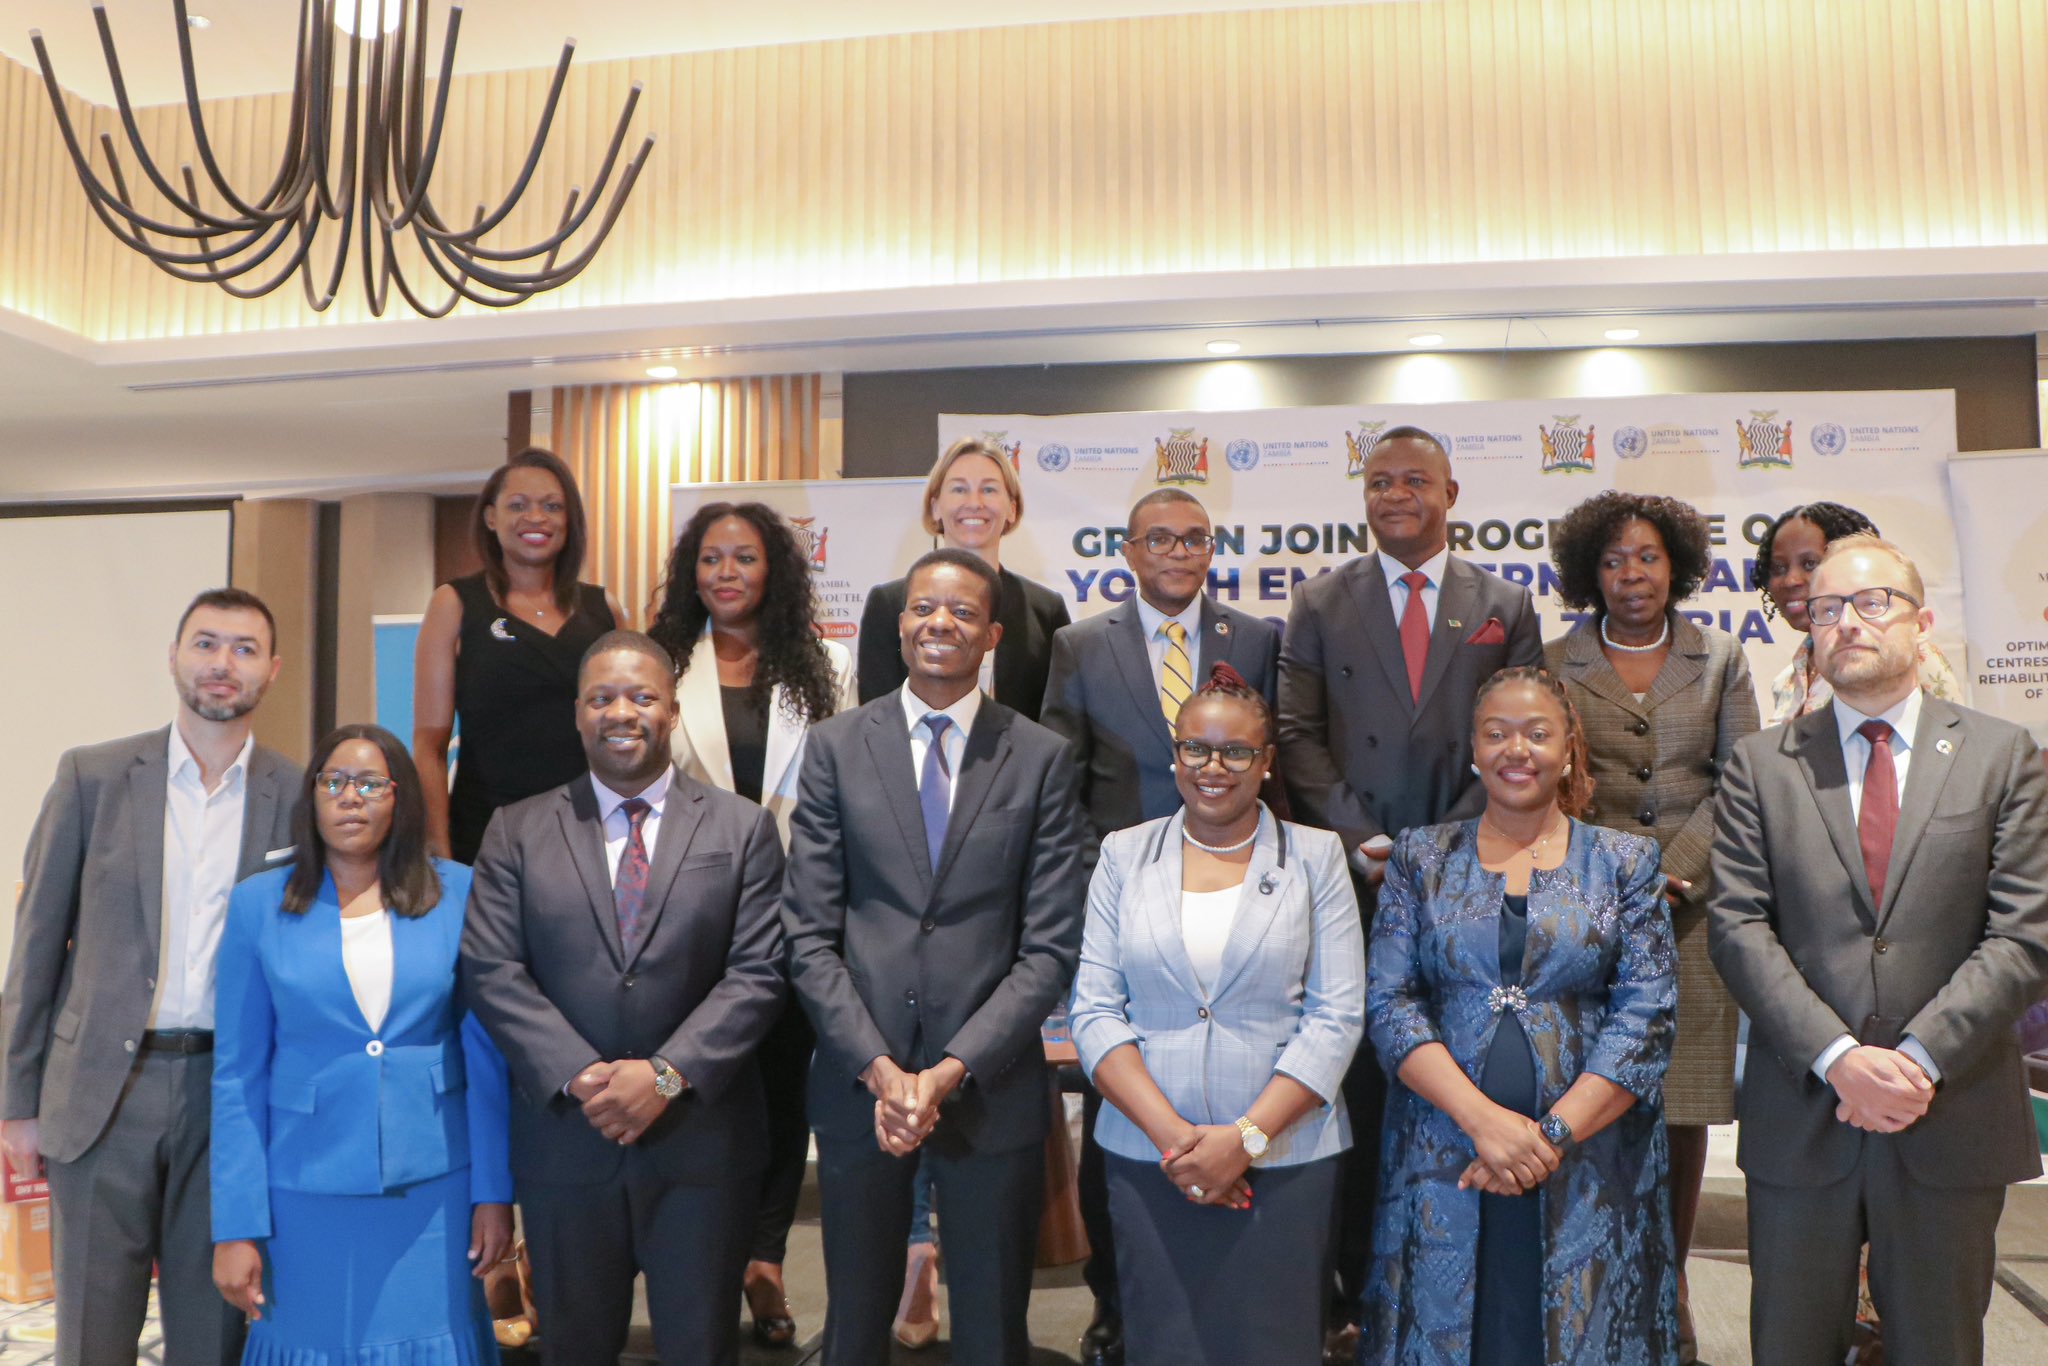 Image of the Minister of Youth, Sports and Arts, the Permanent Secretary of Youth, Sports and Arts, and partners from the private sector and various UN agencies